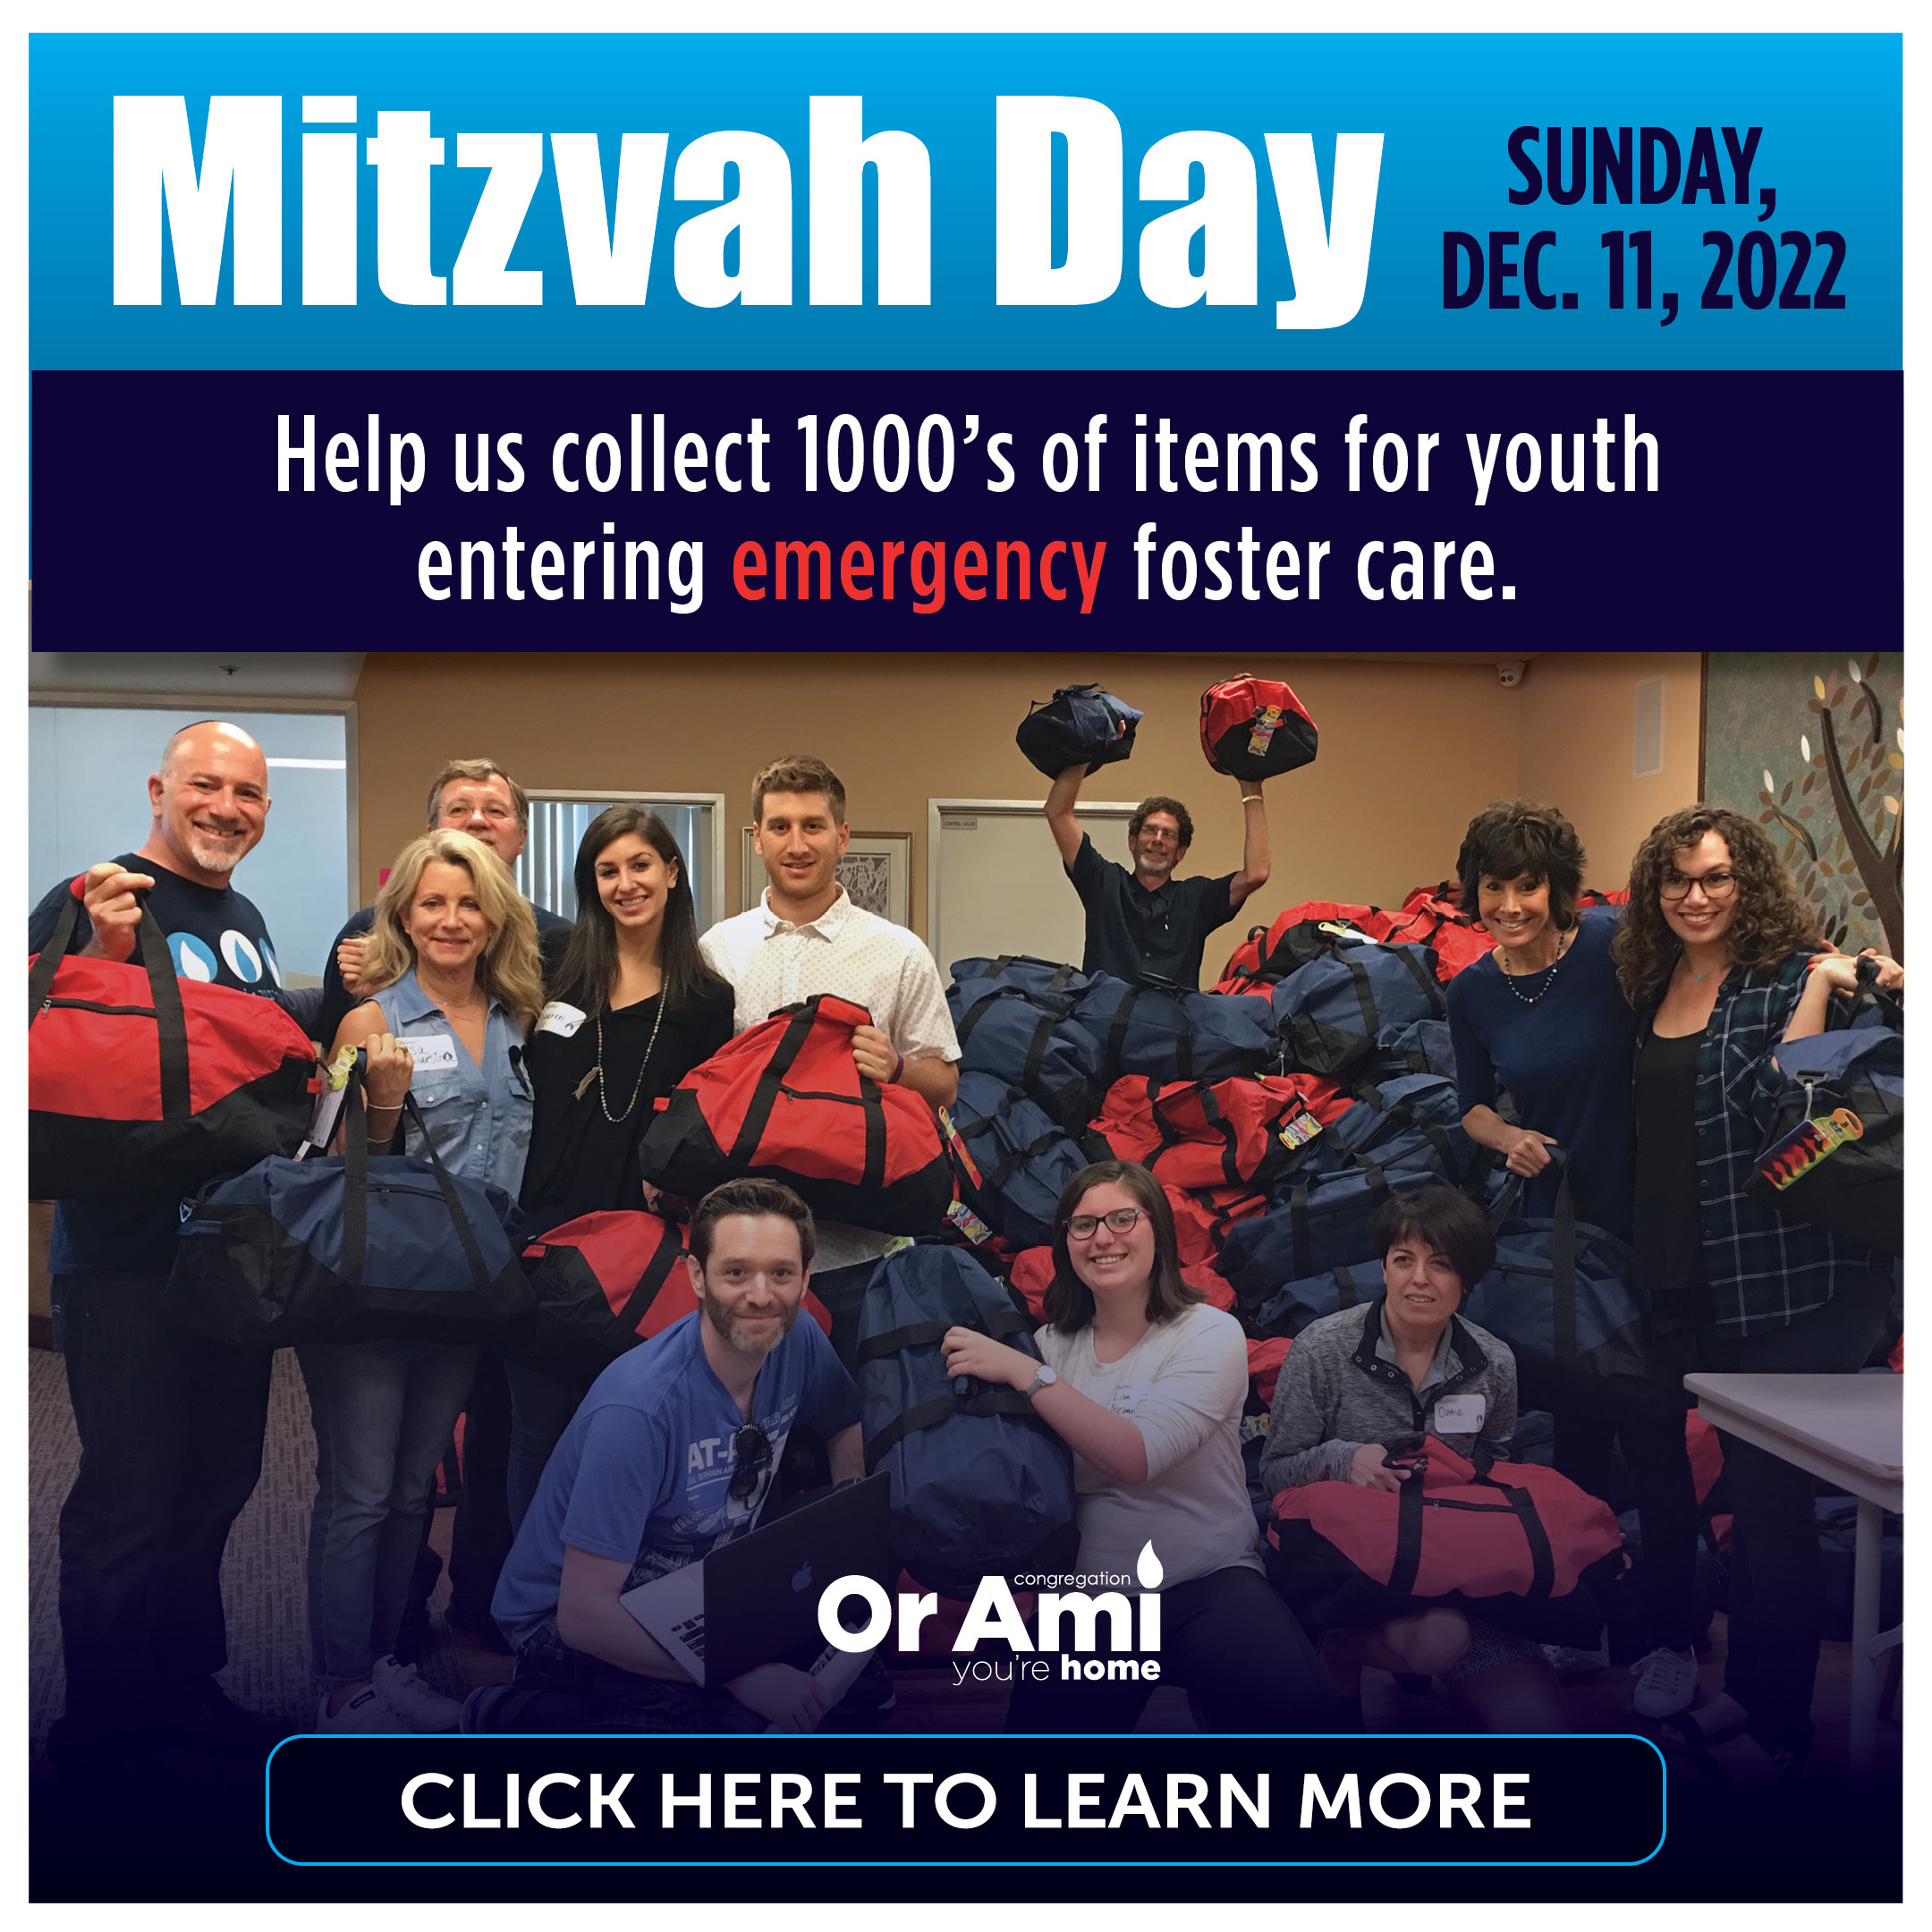 Mitzvah Day Square 2022_new with CLICK